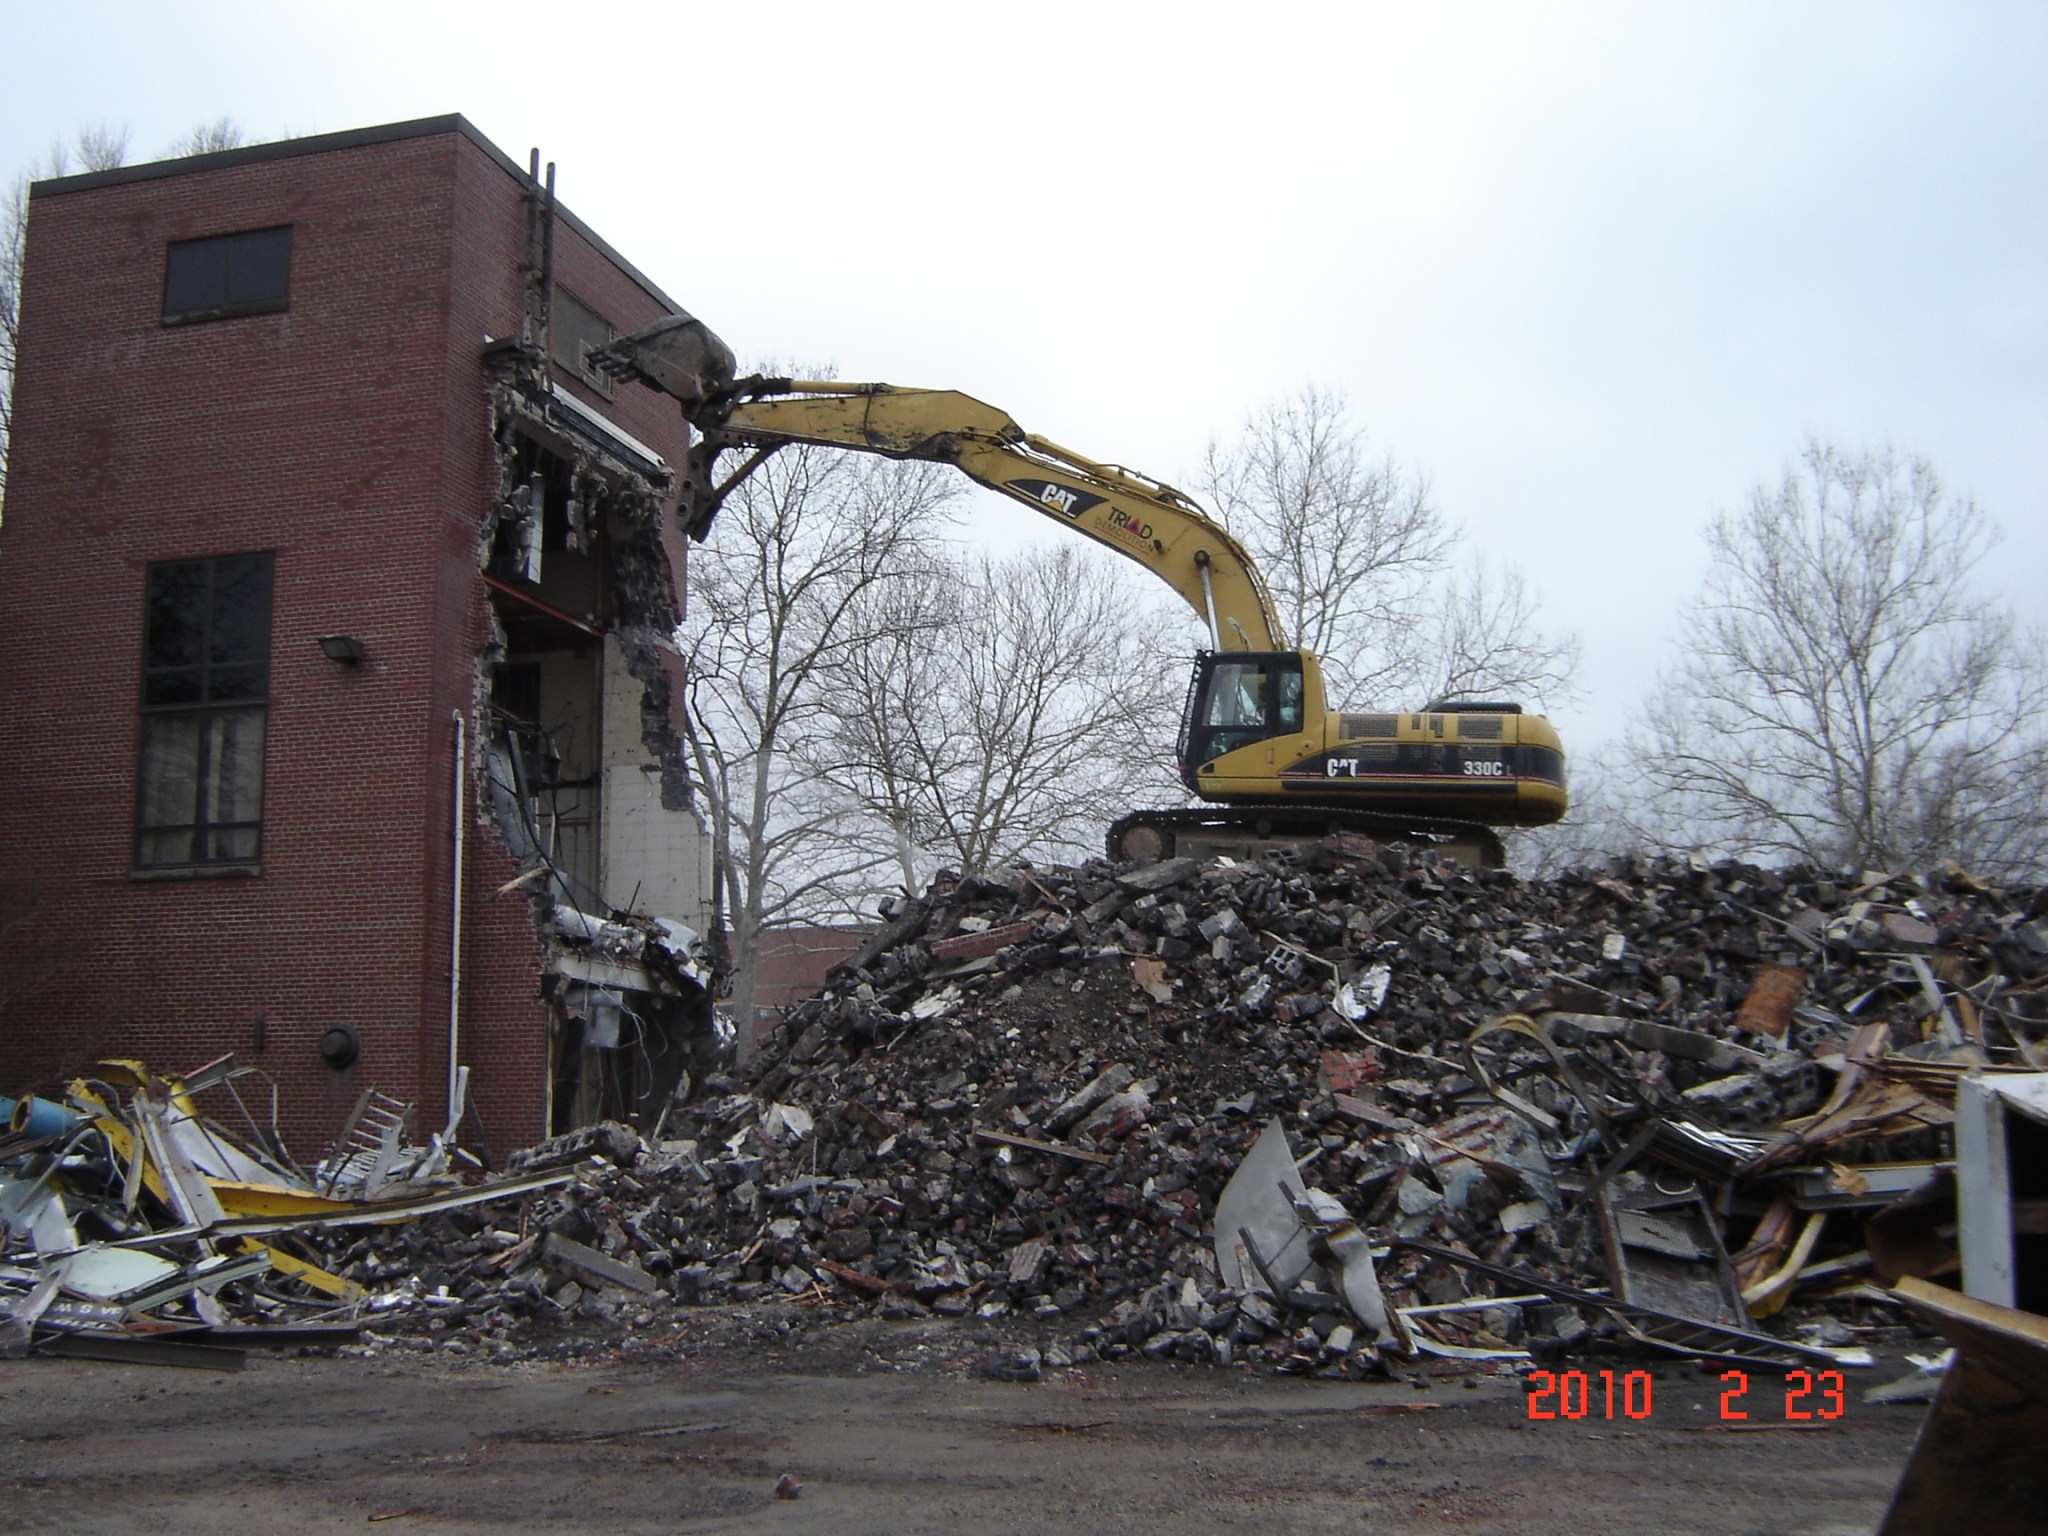 February 2010 photograph of the demolition of Building 1218.